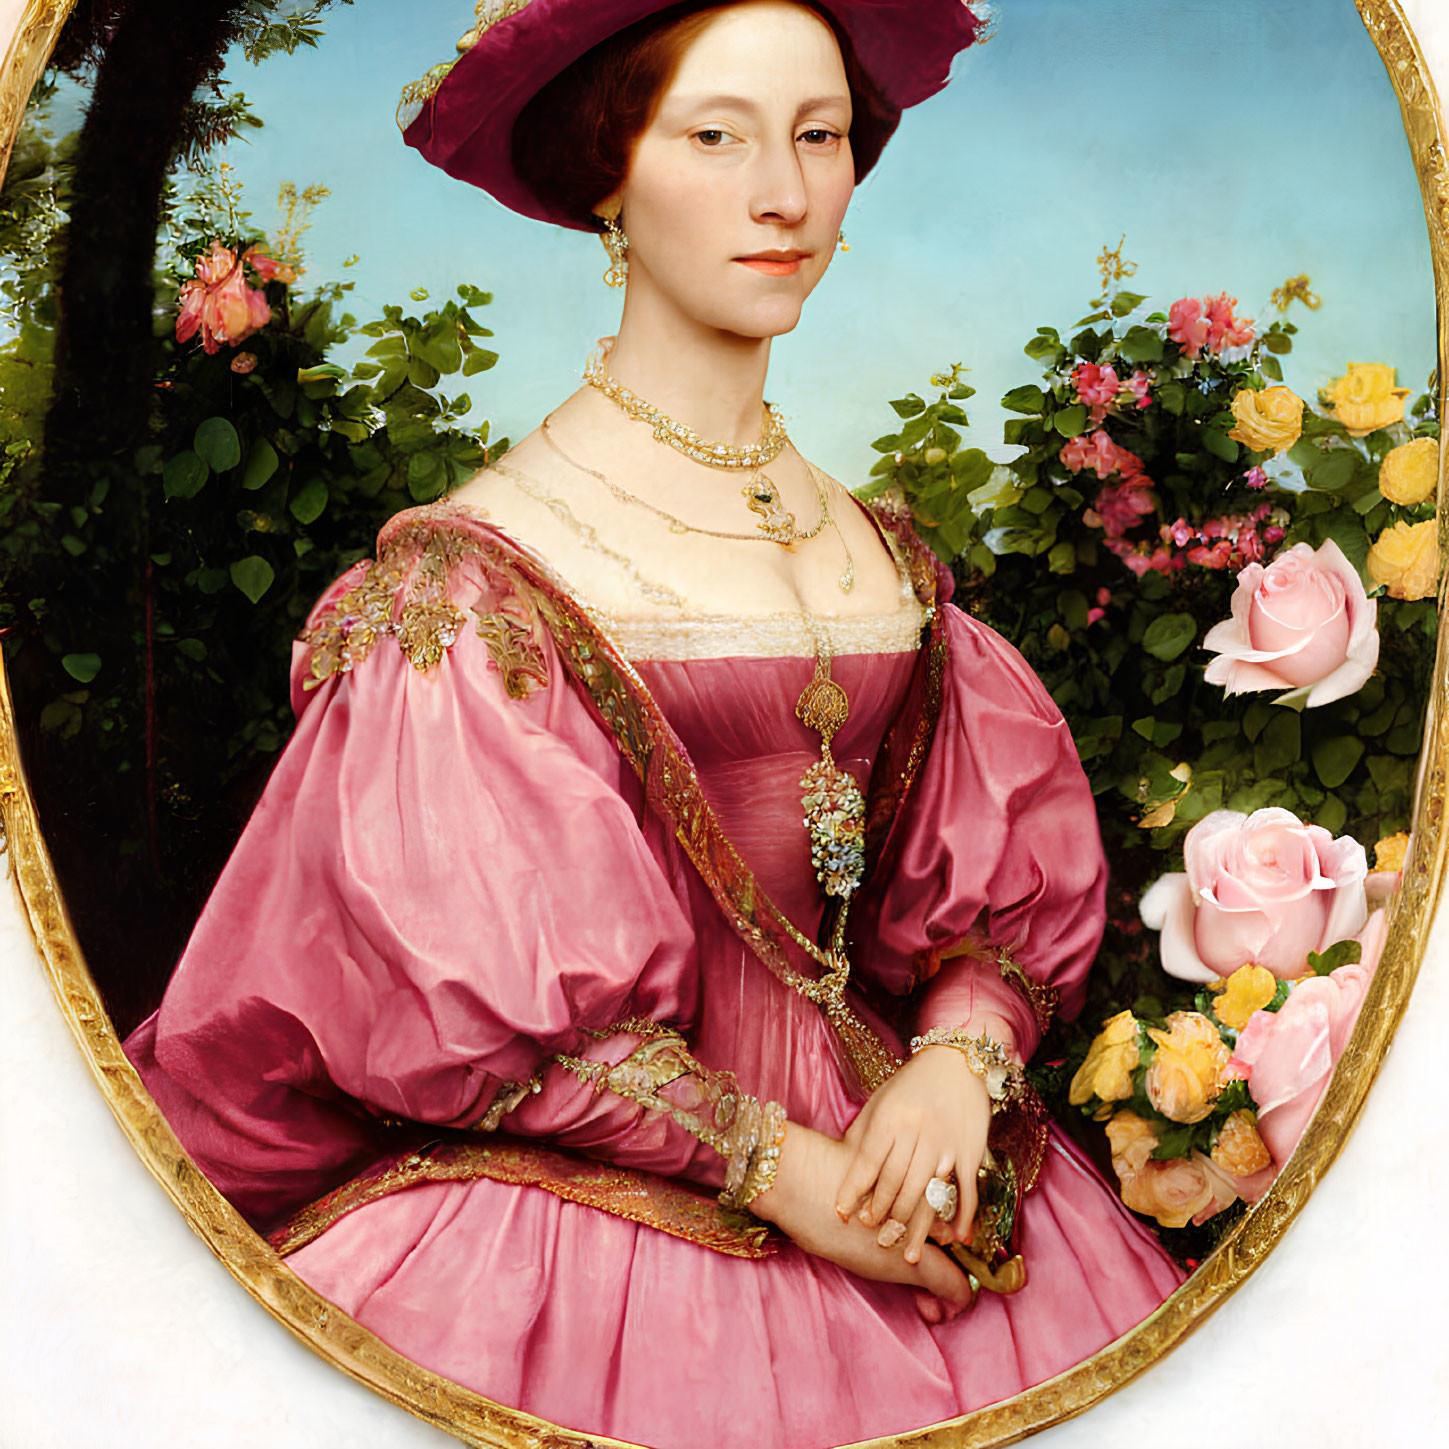 Renaissance woman in pink dress with hat in floral setting